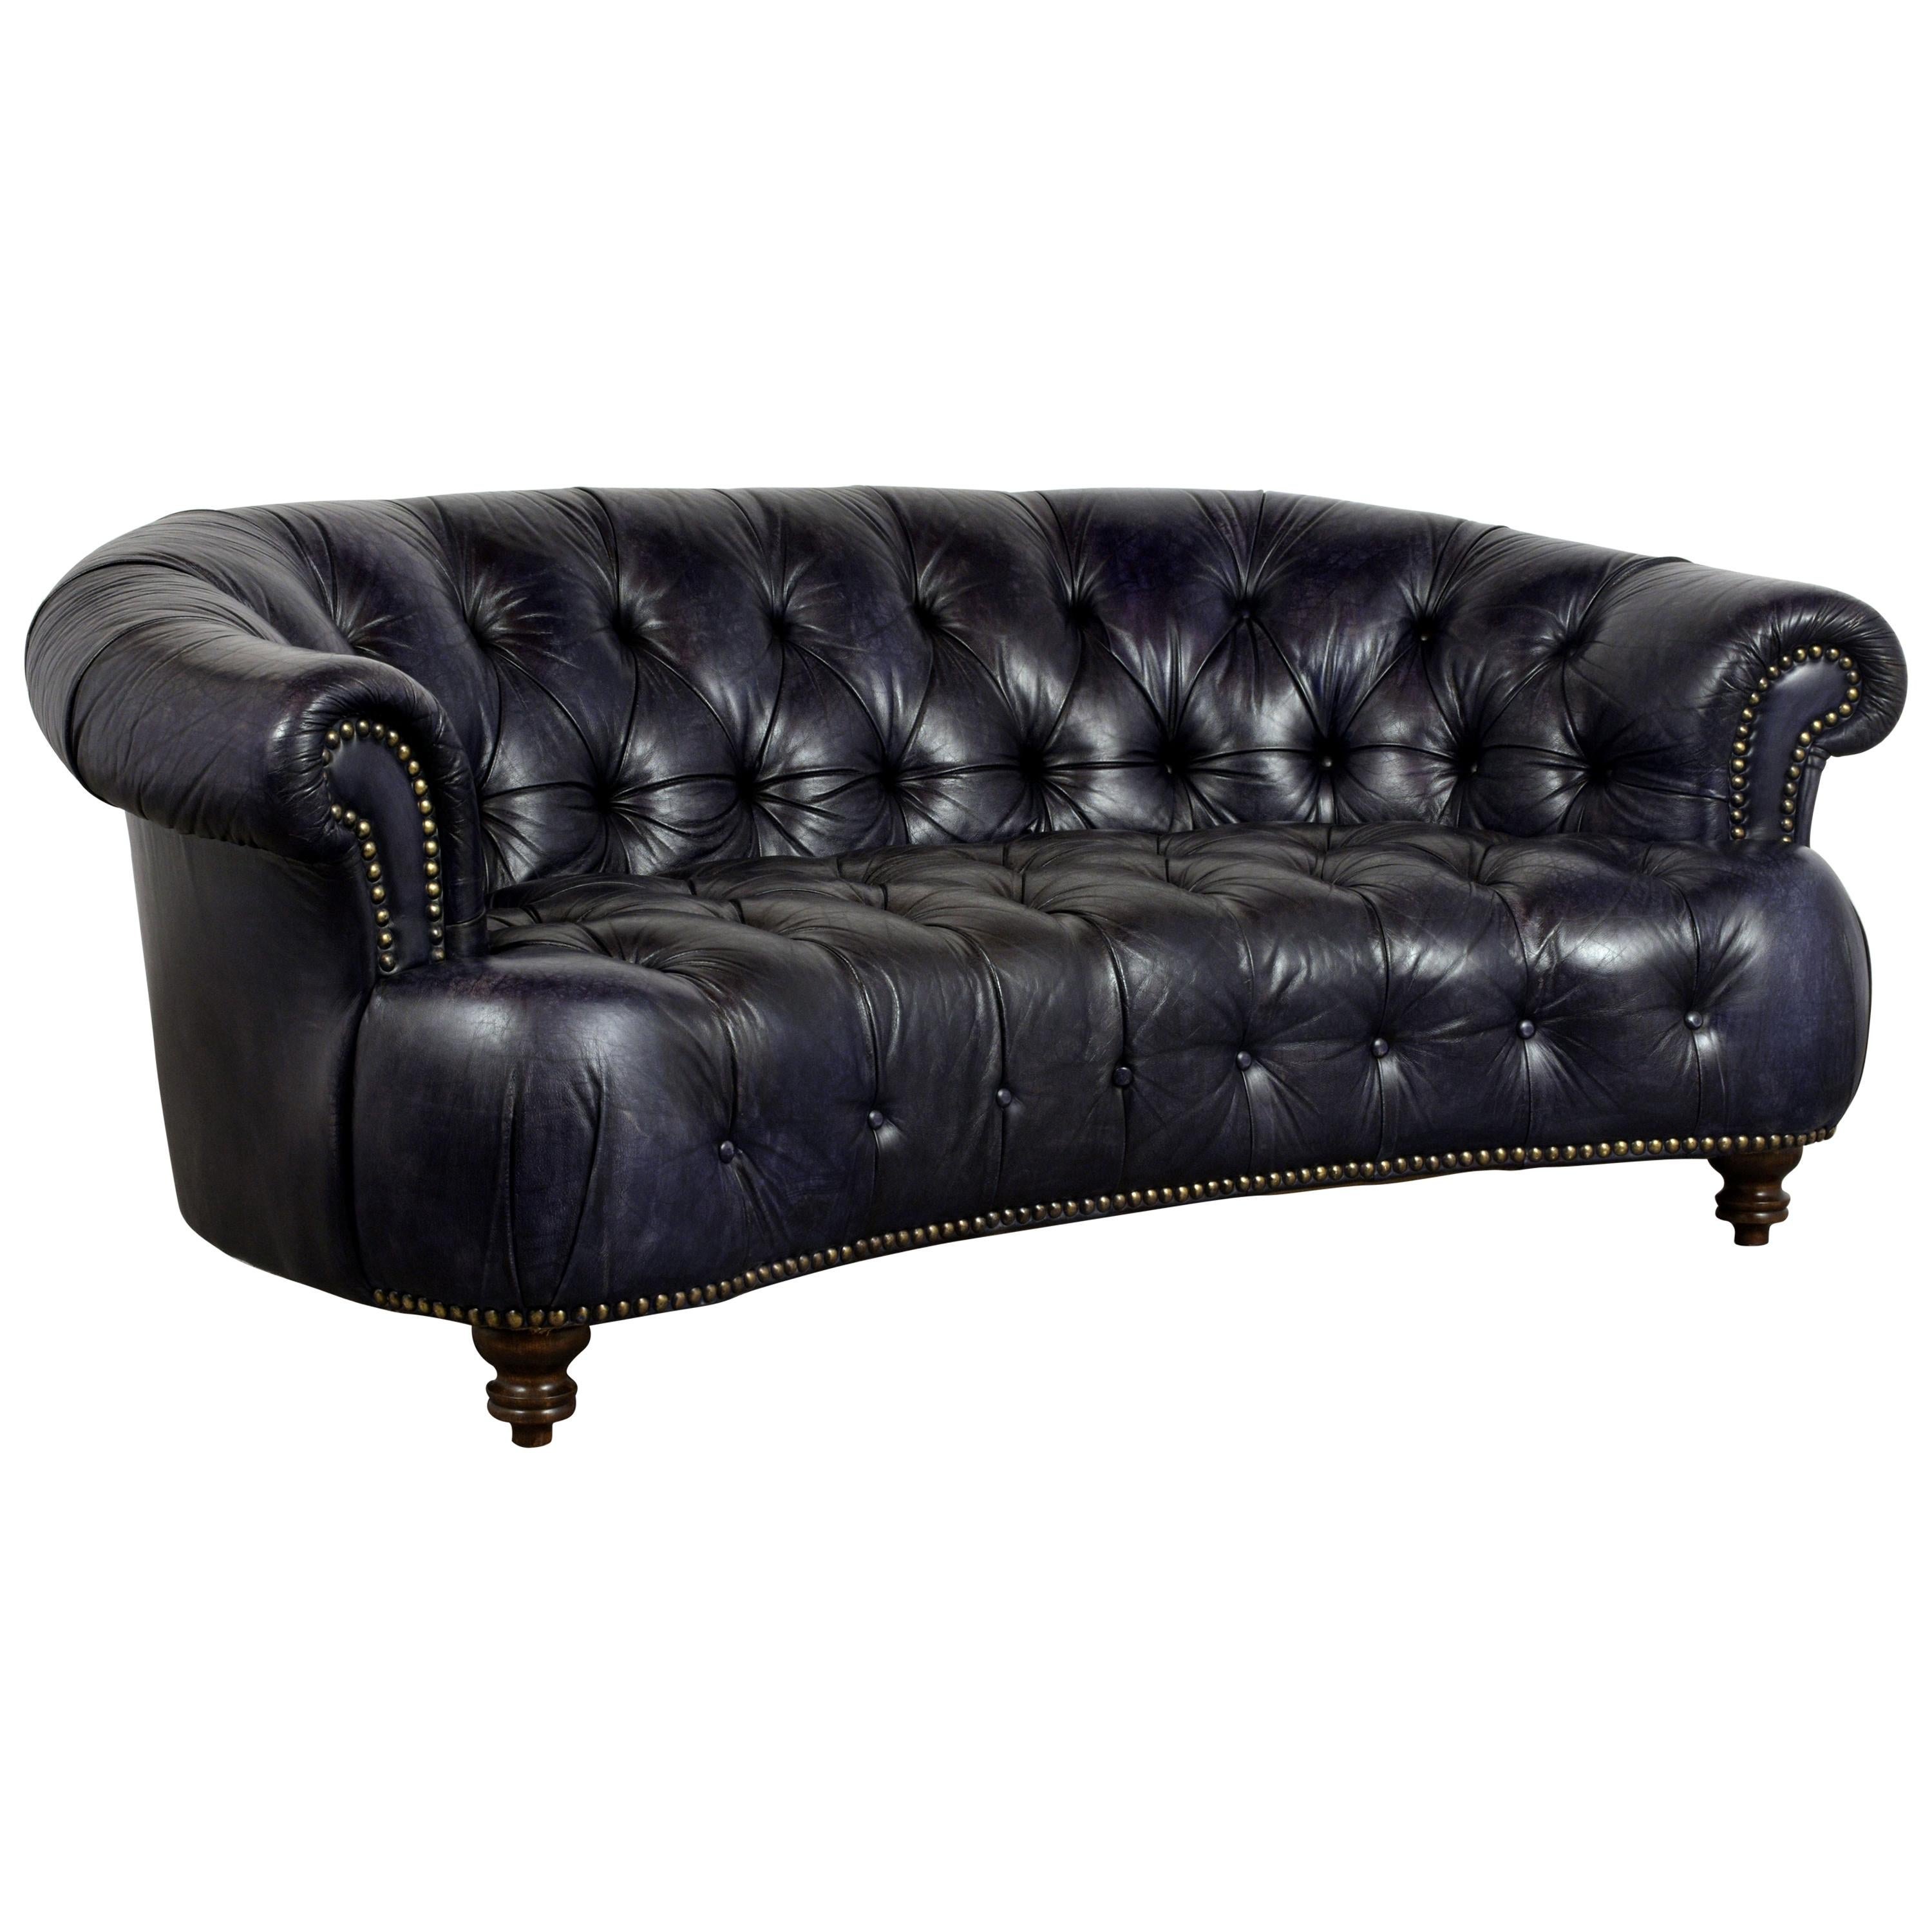 Curved Back Tufted Chesterfield Leather Sofa, circa 1970s